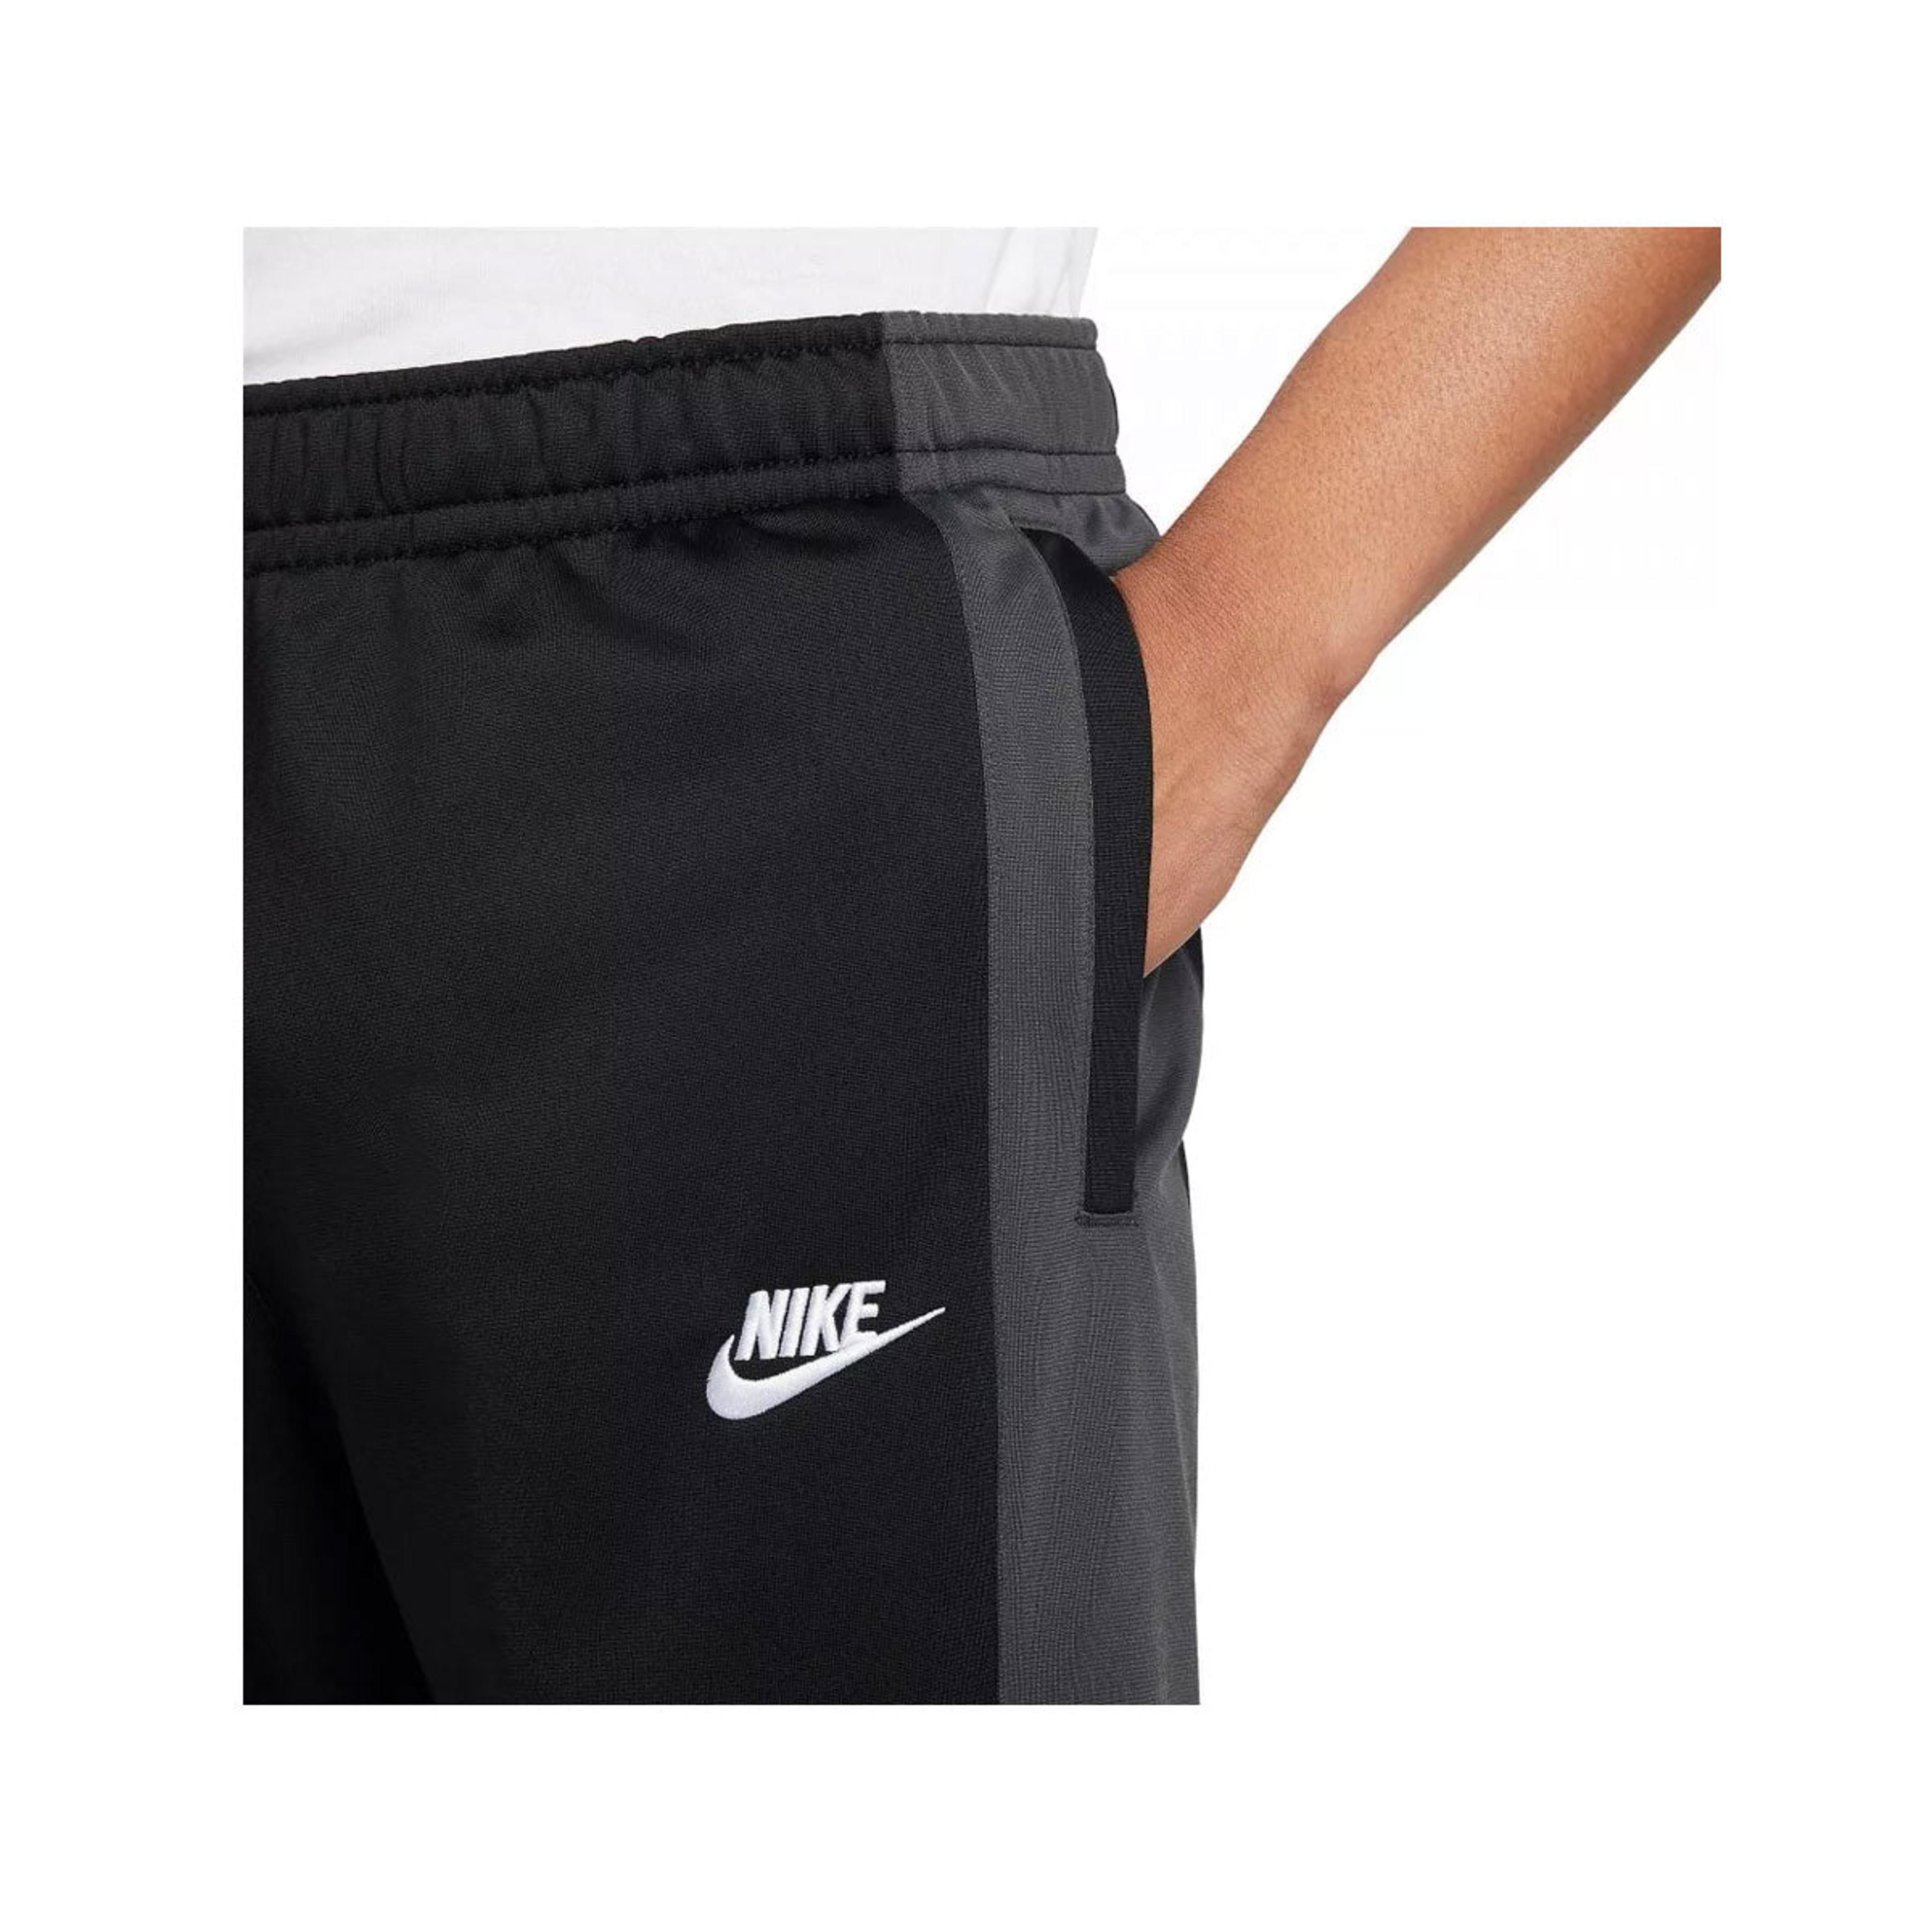 Alternate View 2 of Nike Men's Sport Essentials Poly-Knit